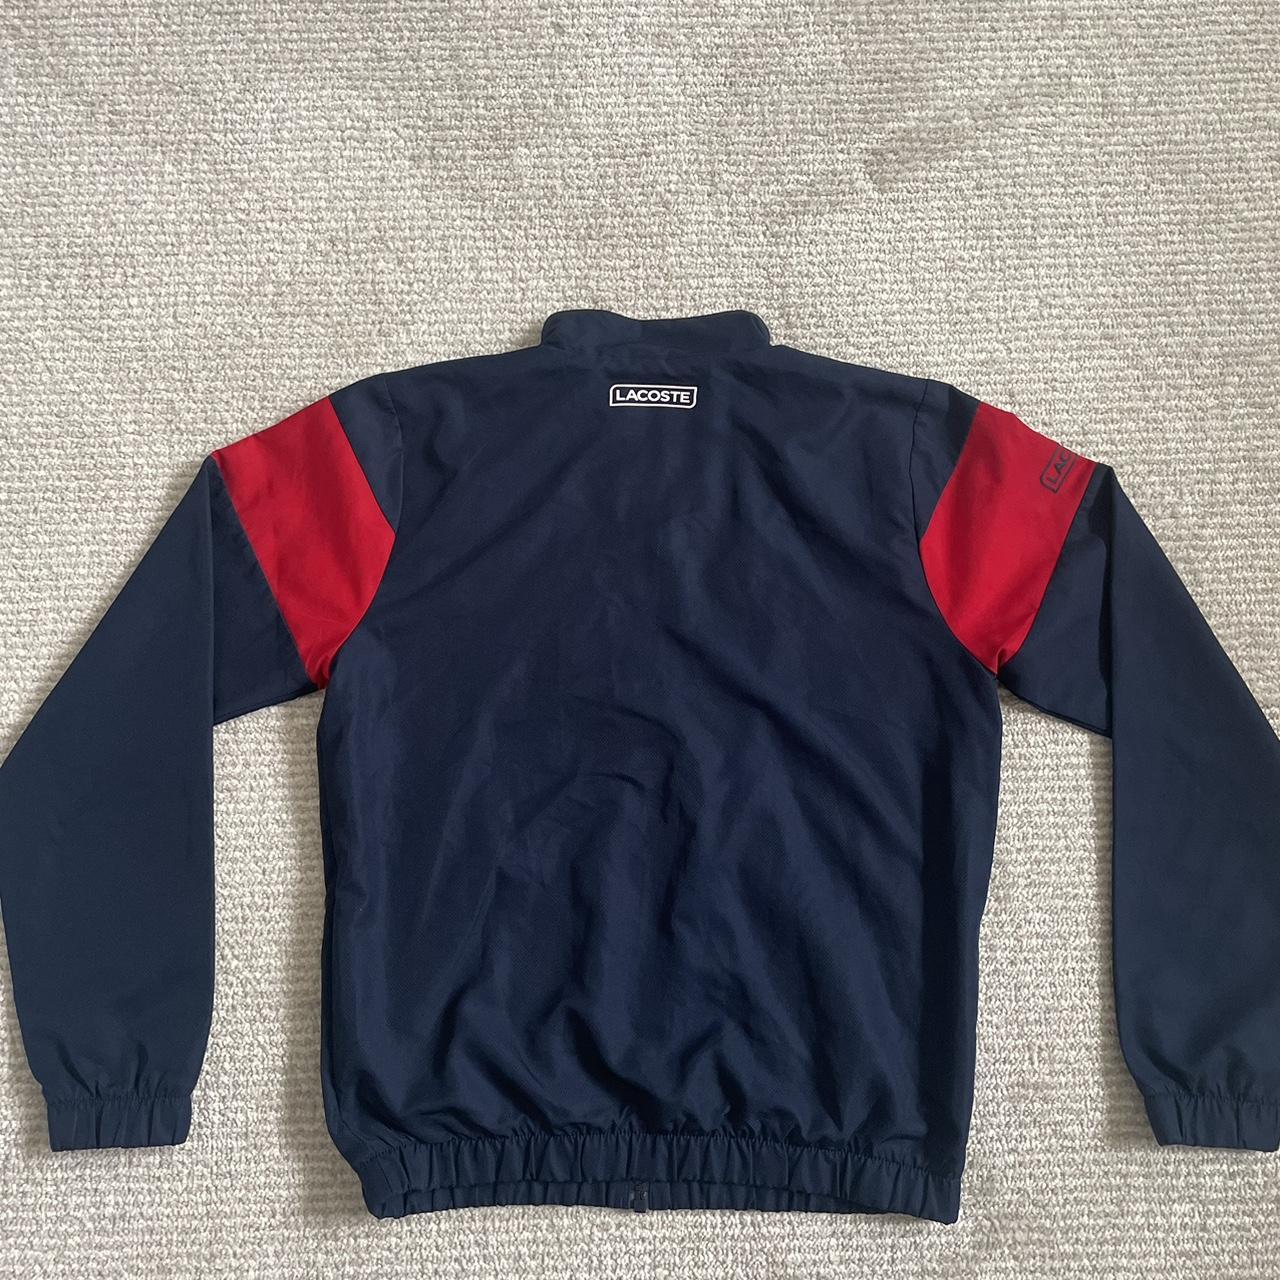 Lacoste Red and Navy Jumper | Depop